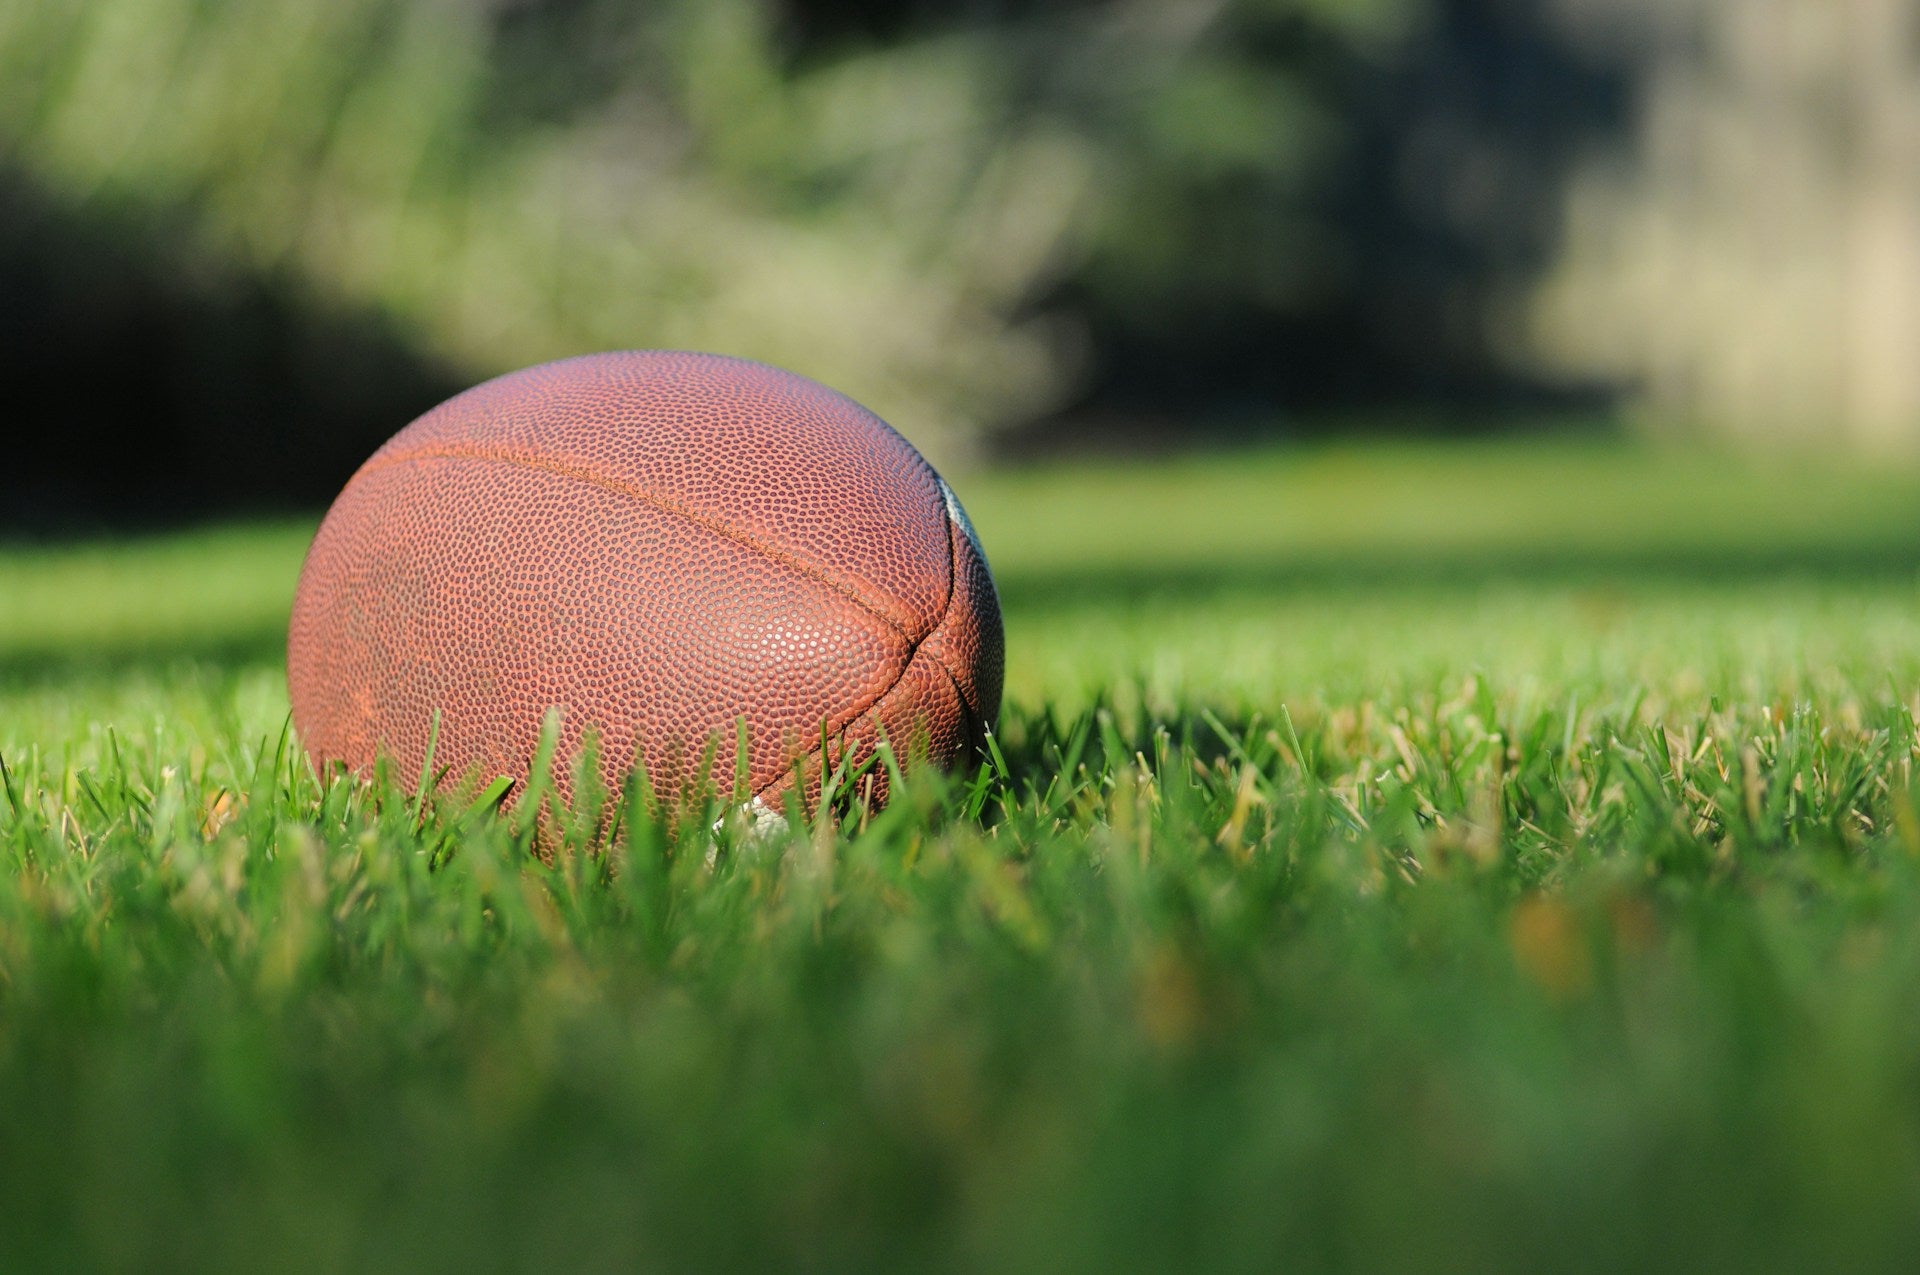 football sitting in the grass